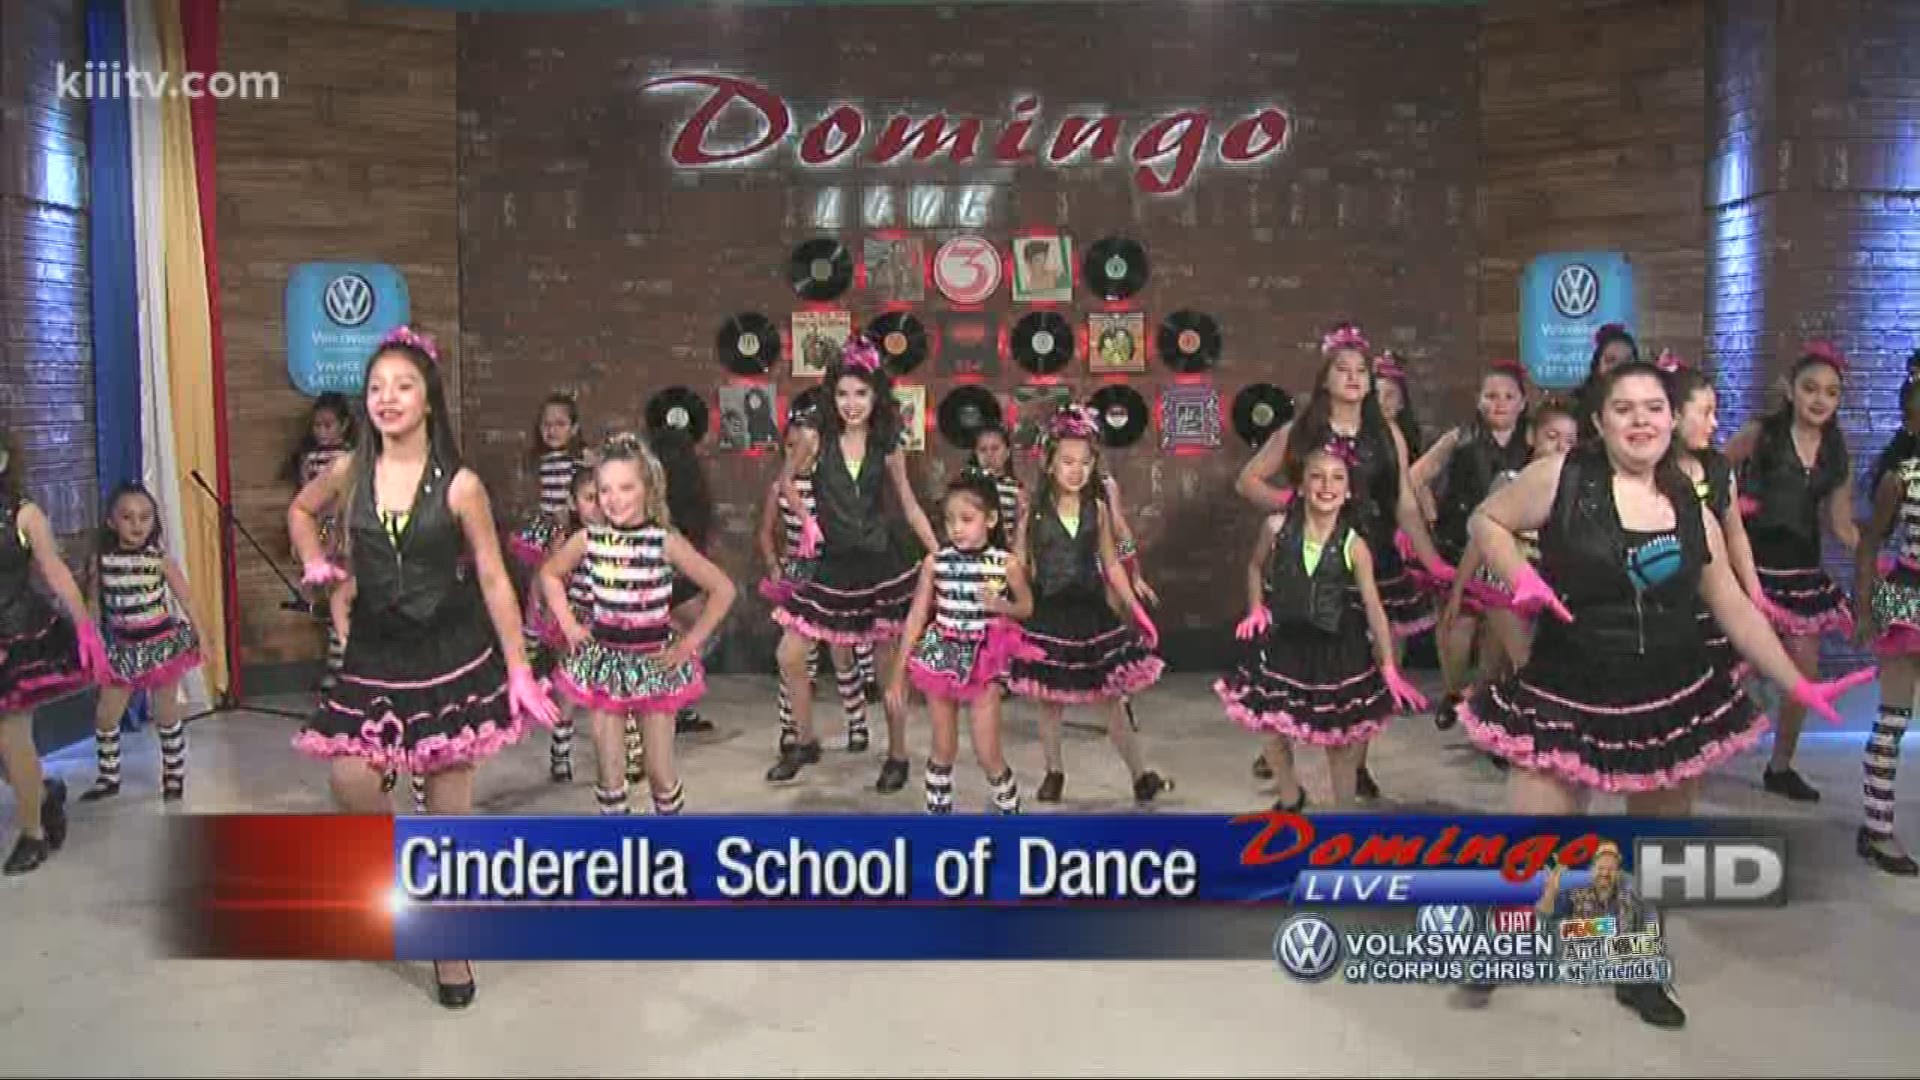 Cinderella School of Dance performing "Kid In A Candy Store" on Domingo Live.